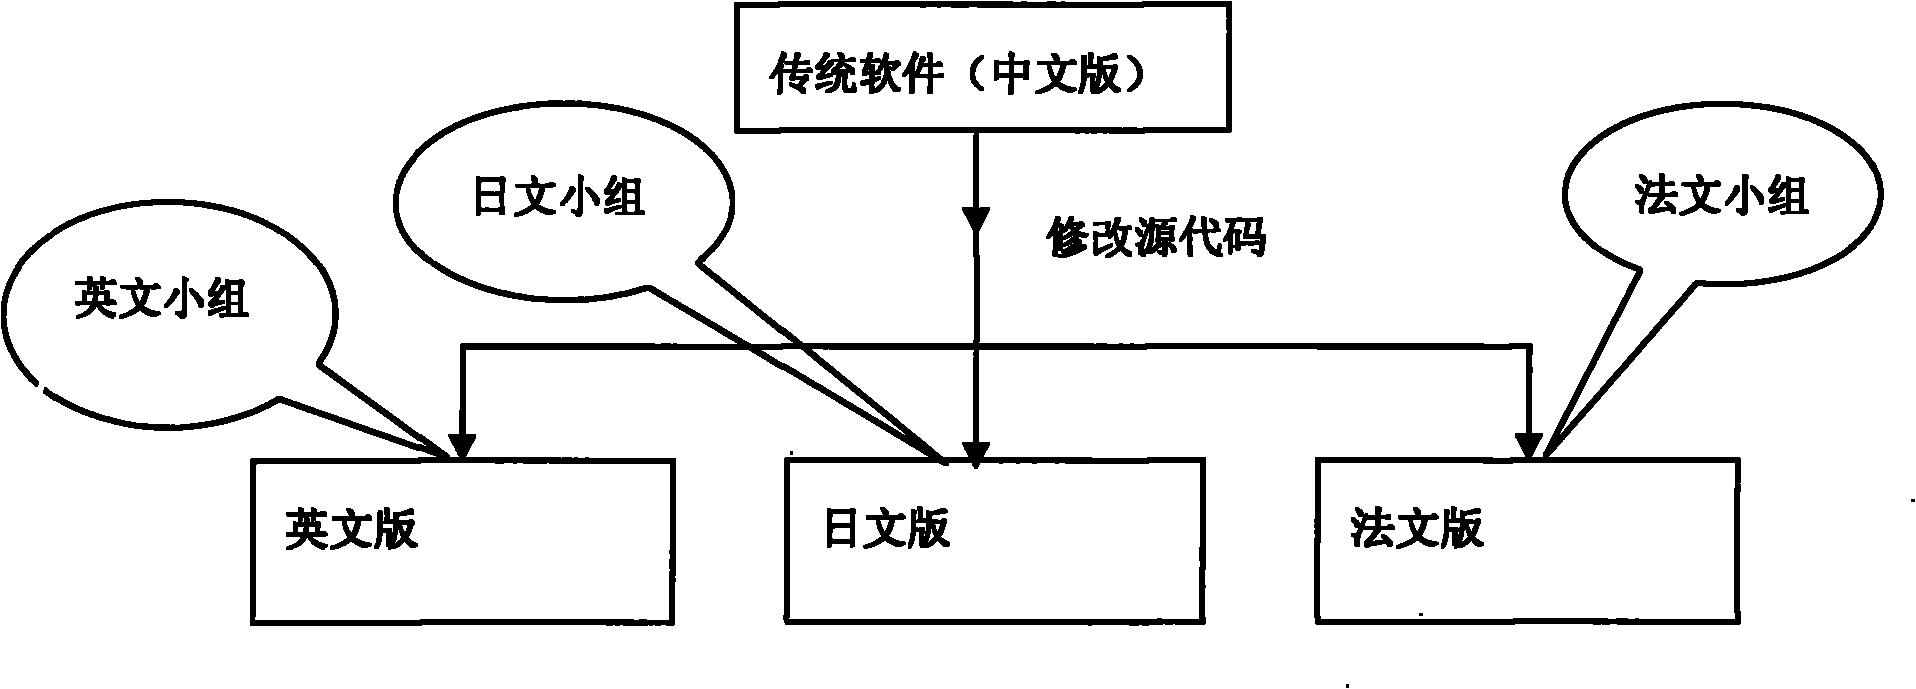 Internationalizing system of picture and text packaging programming control software